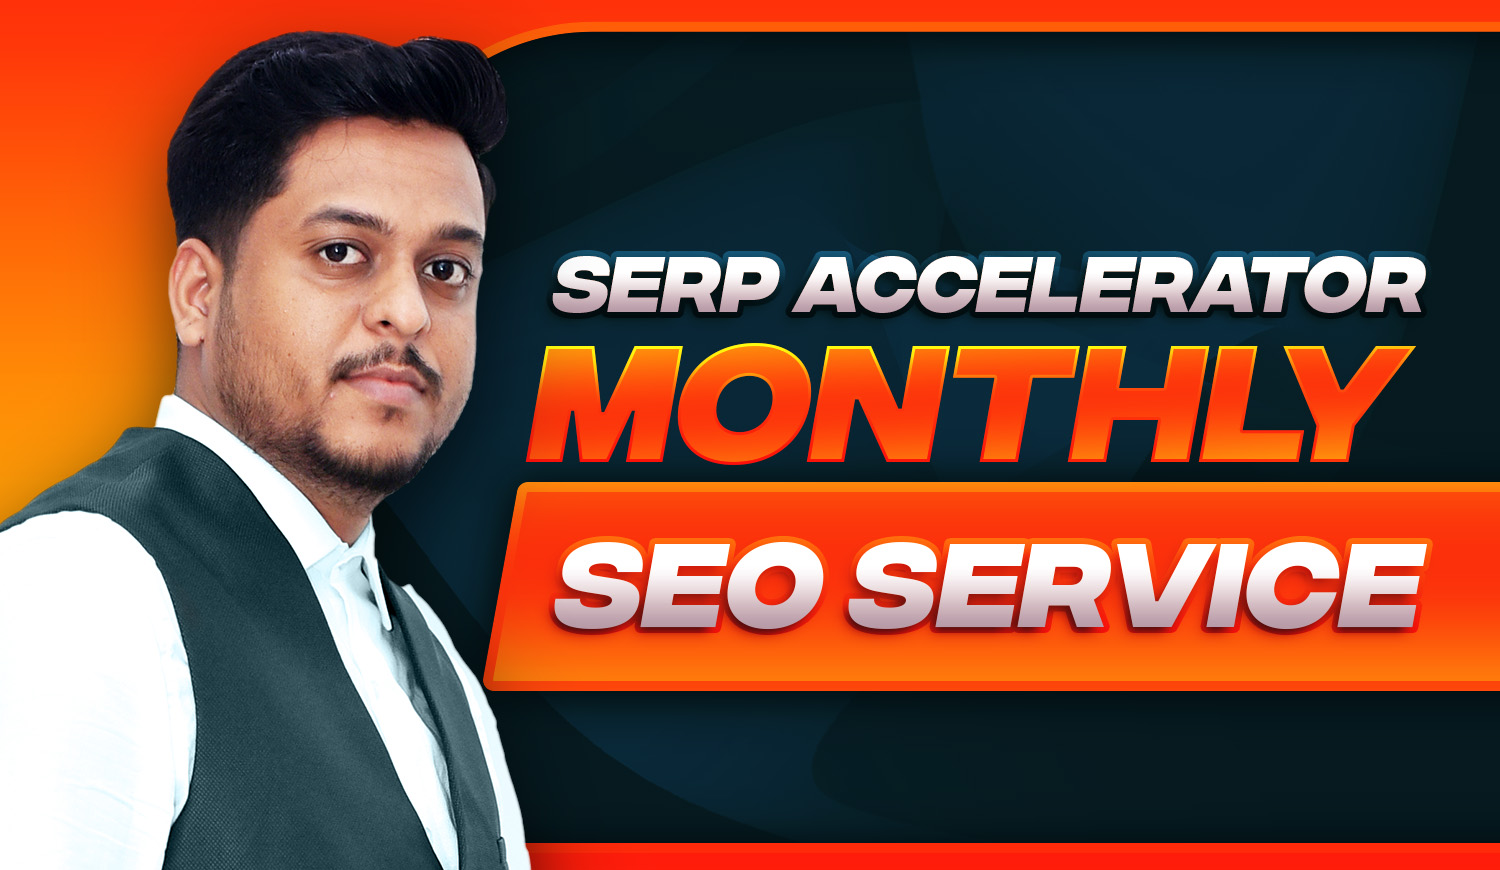 SERP ACCELERATOR NO 1 Monthly SEO Service - explode your ranking